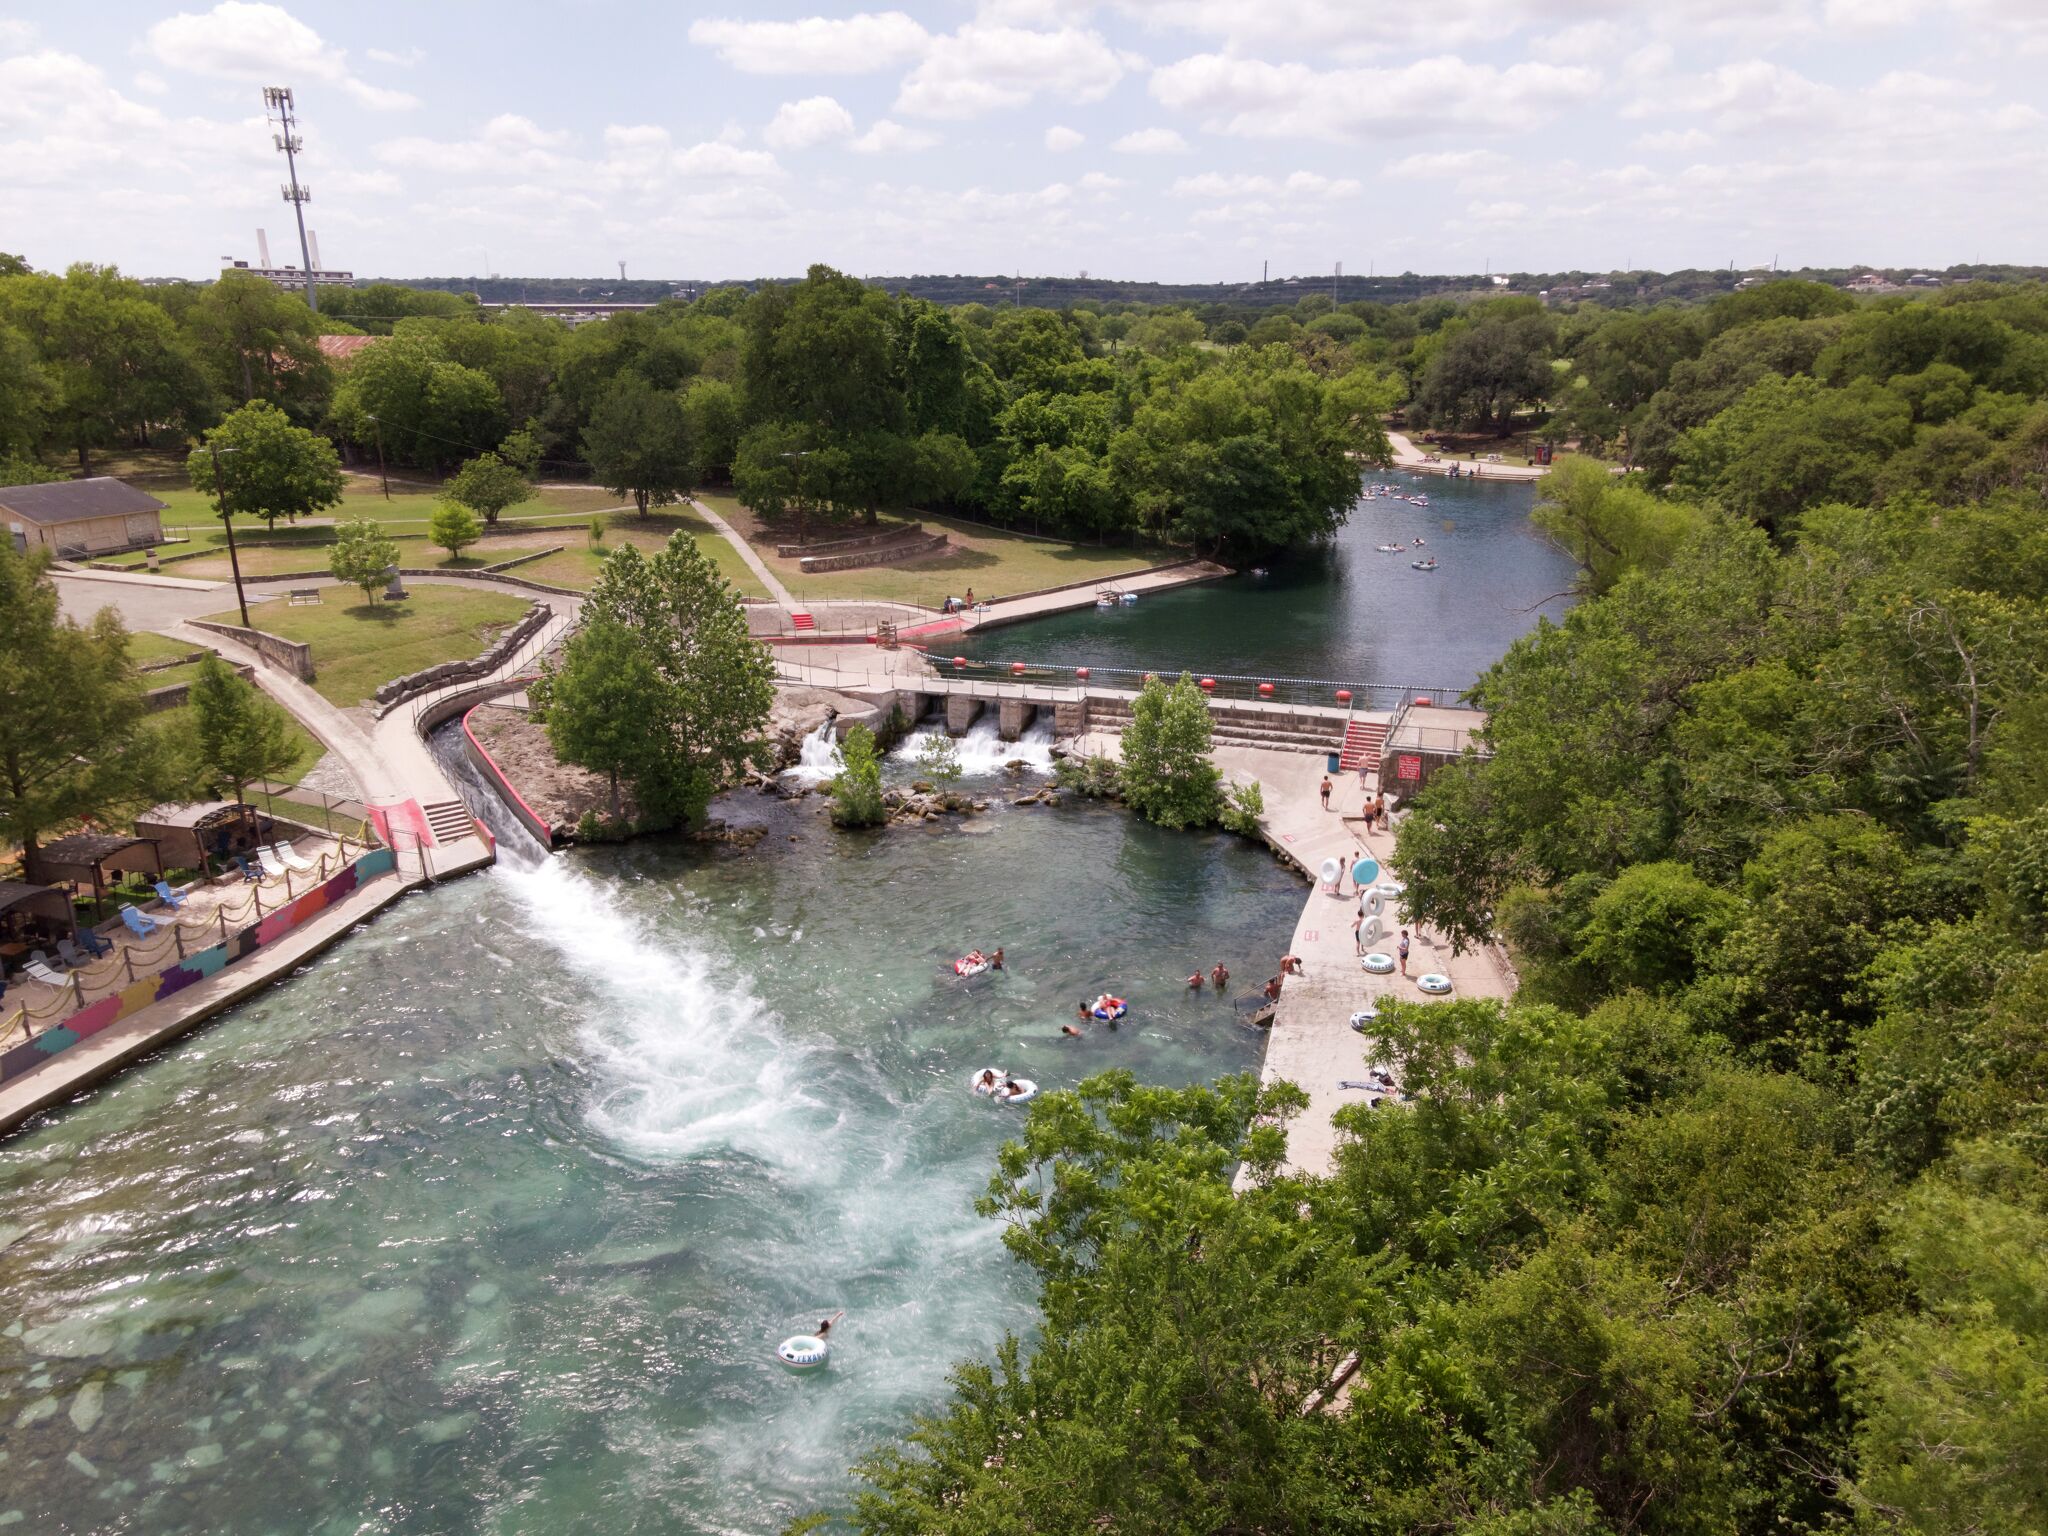 Visiting New Braunfels to float the river? Here's what the mayor has to say